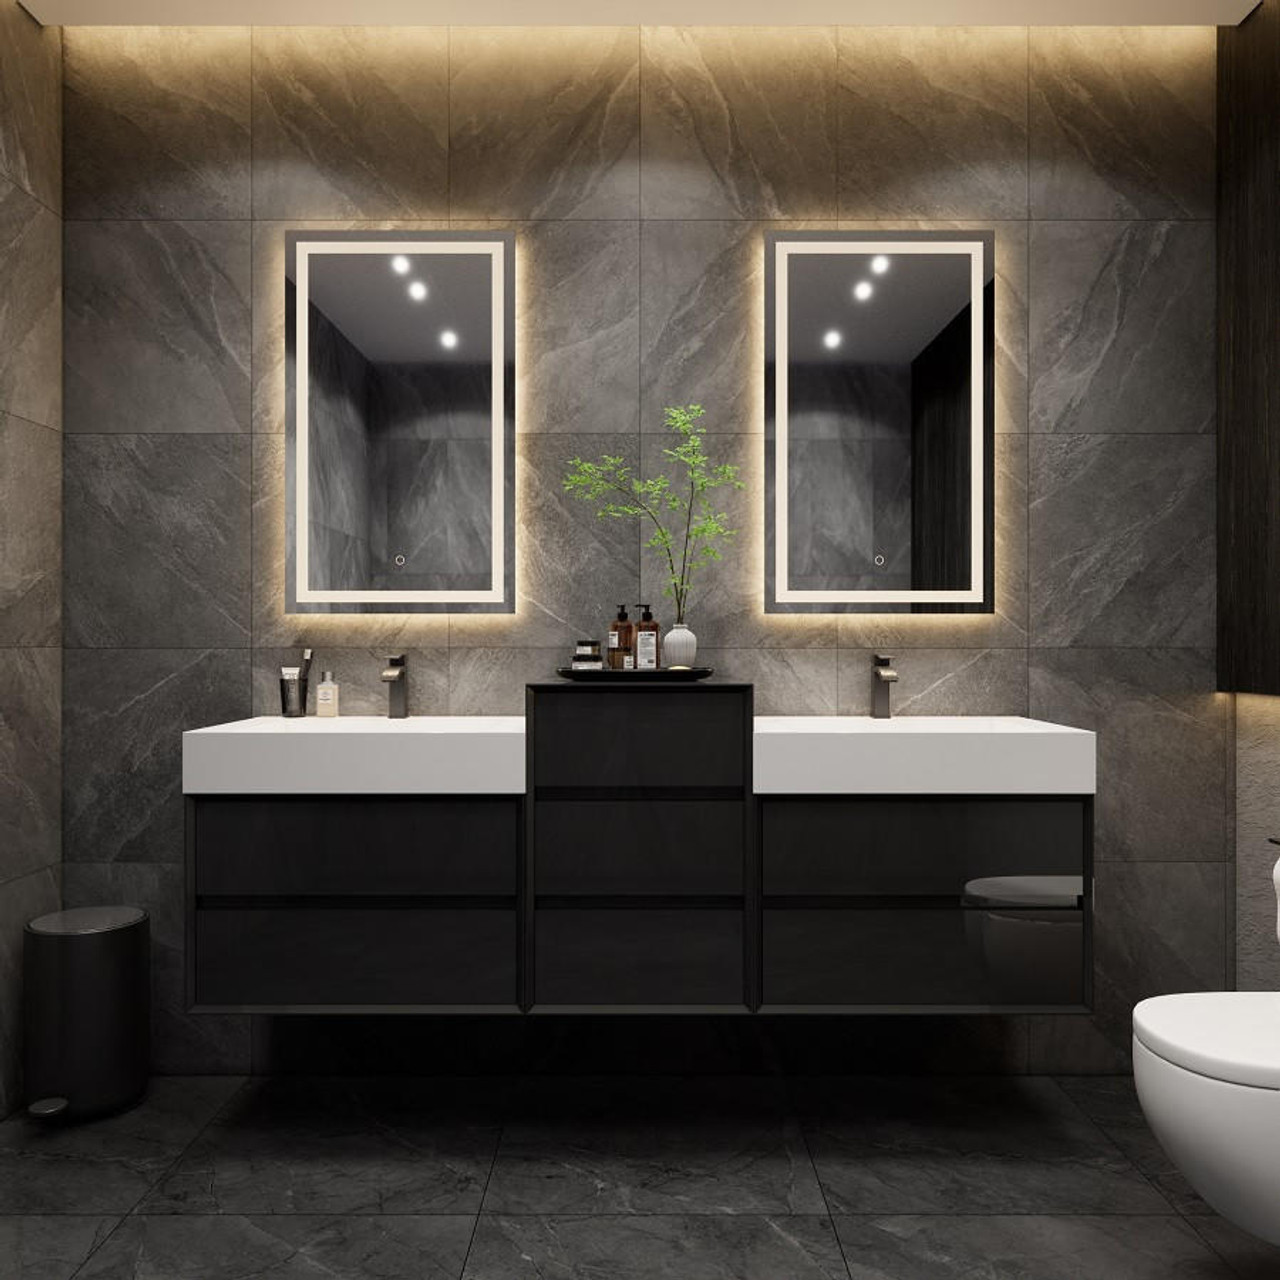 https://cdn11.bigcommerce.com/s-qgdlnuy6t7/images/stencil/1280x1280/products/1388/13390/max16-max-92d-wall-mounted-bath-vanity-with-16-acrylic-sink-wsmall-side-cabinet__82046.1679352616.jpg?c=2